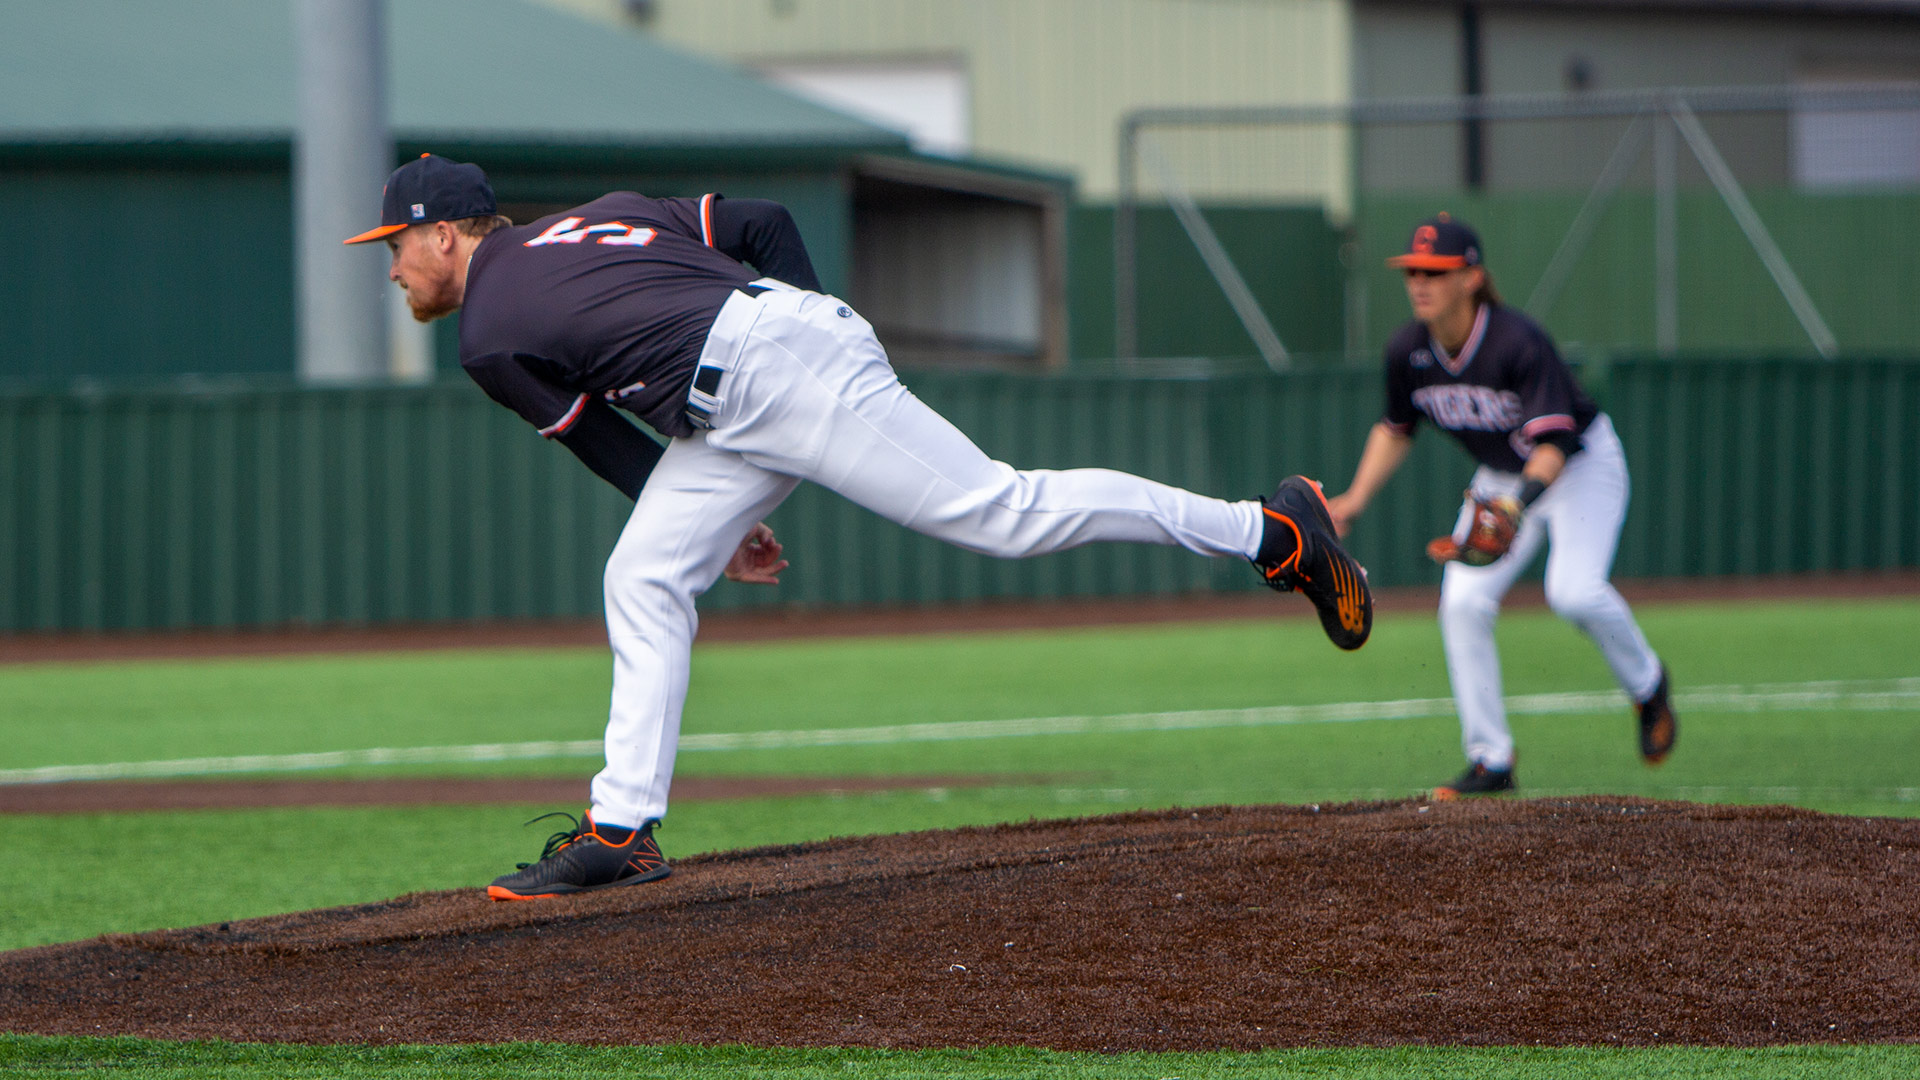 Pitching leads Tiger baseball team to conference-opening wins